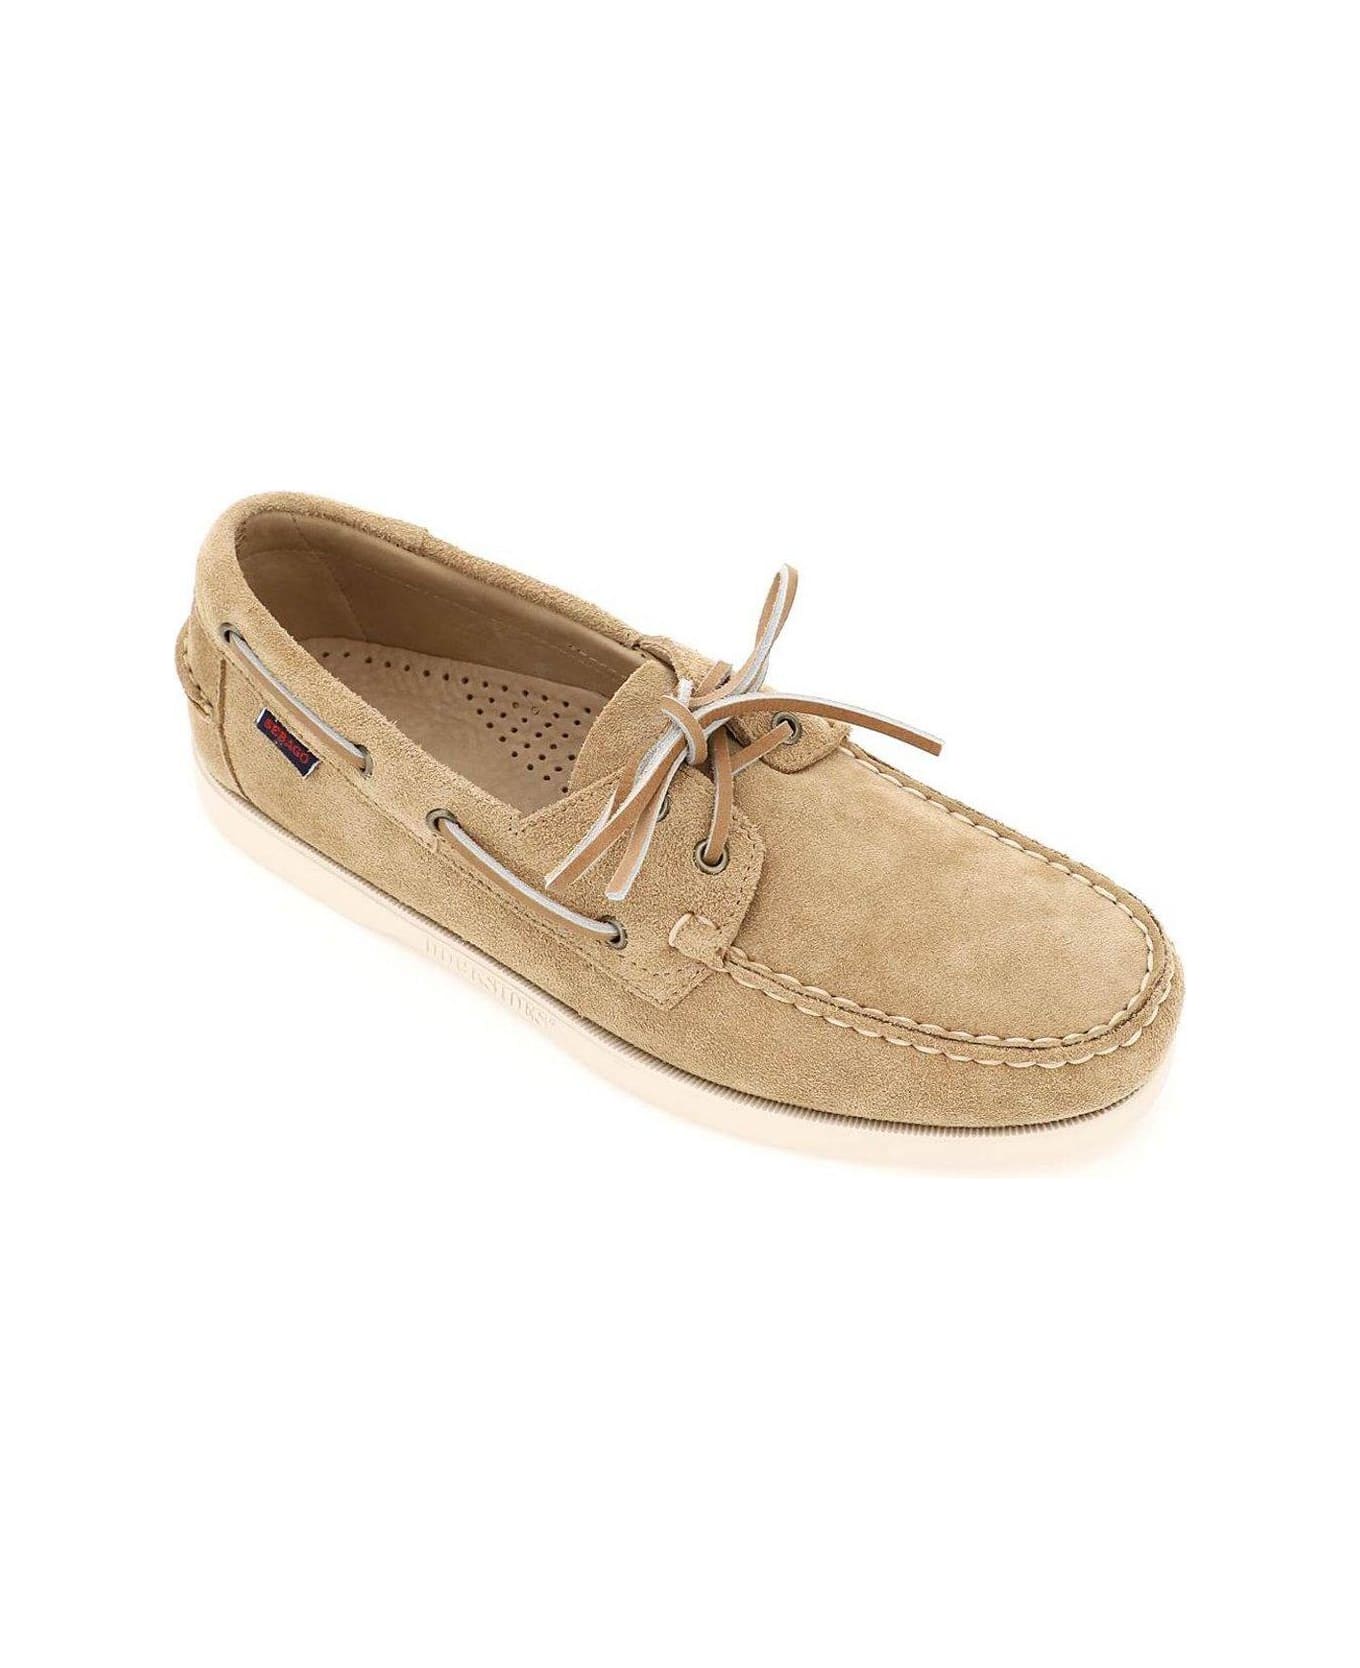 Sebago Lace-up Round Toe Boat Shoes - Beige Camel ローファー＆デッキシューズ